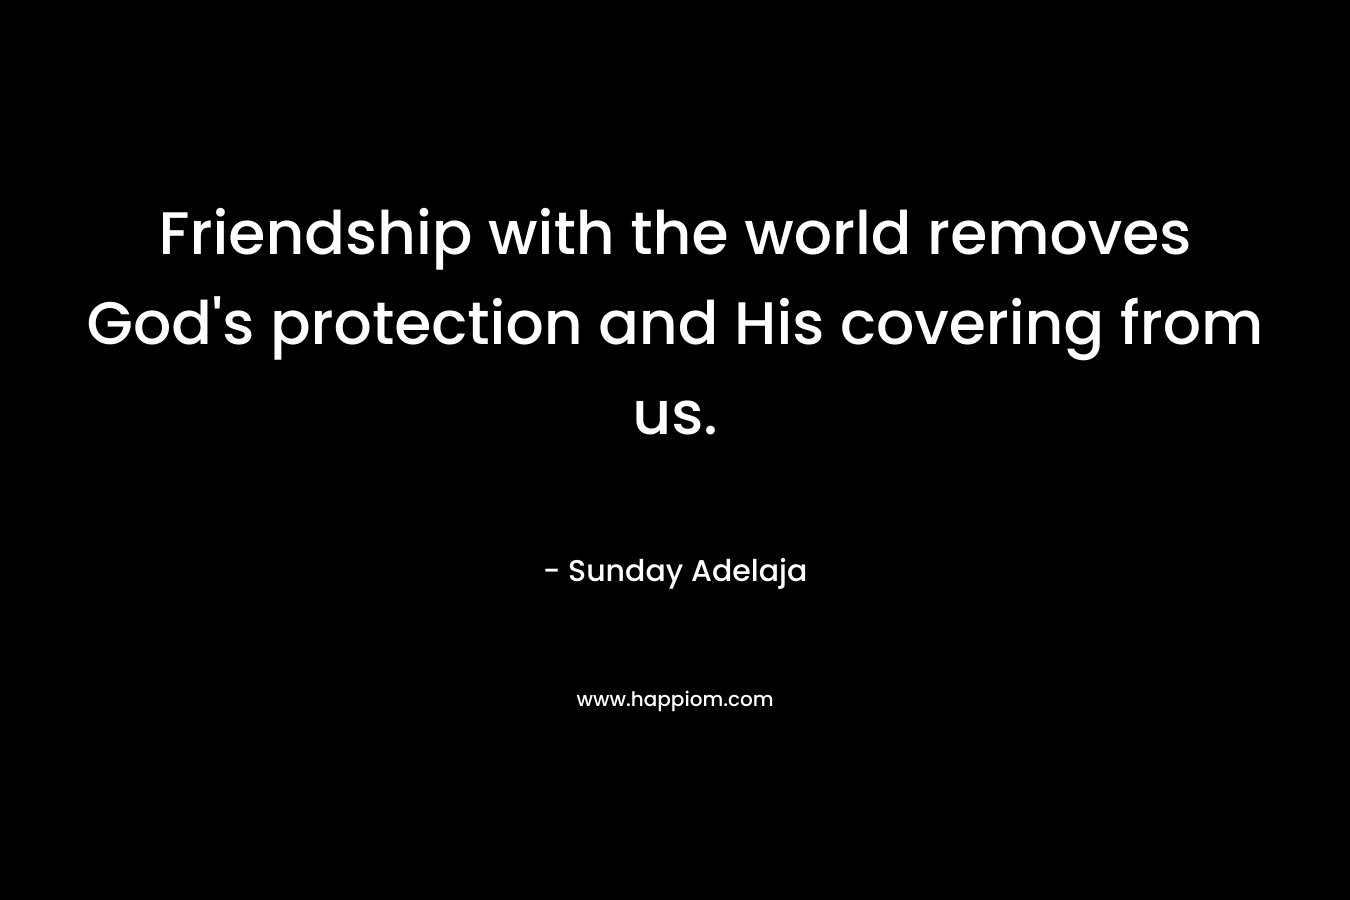 Friendship with the world removes God’s protection and His covering from us. – Sunday Adelaja